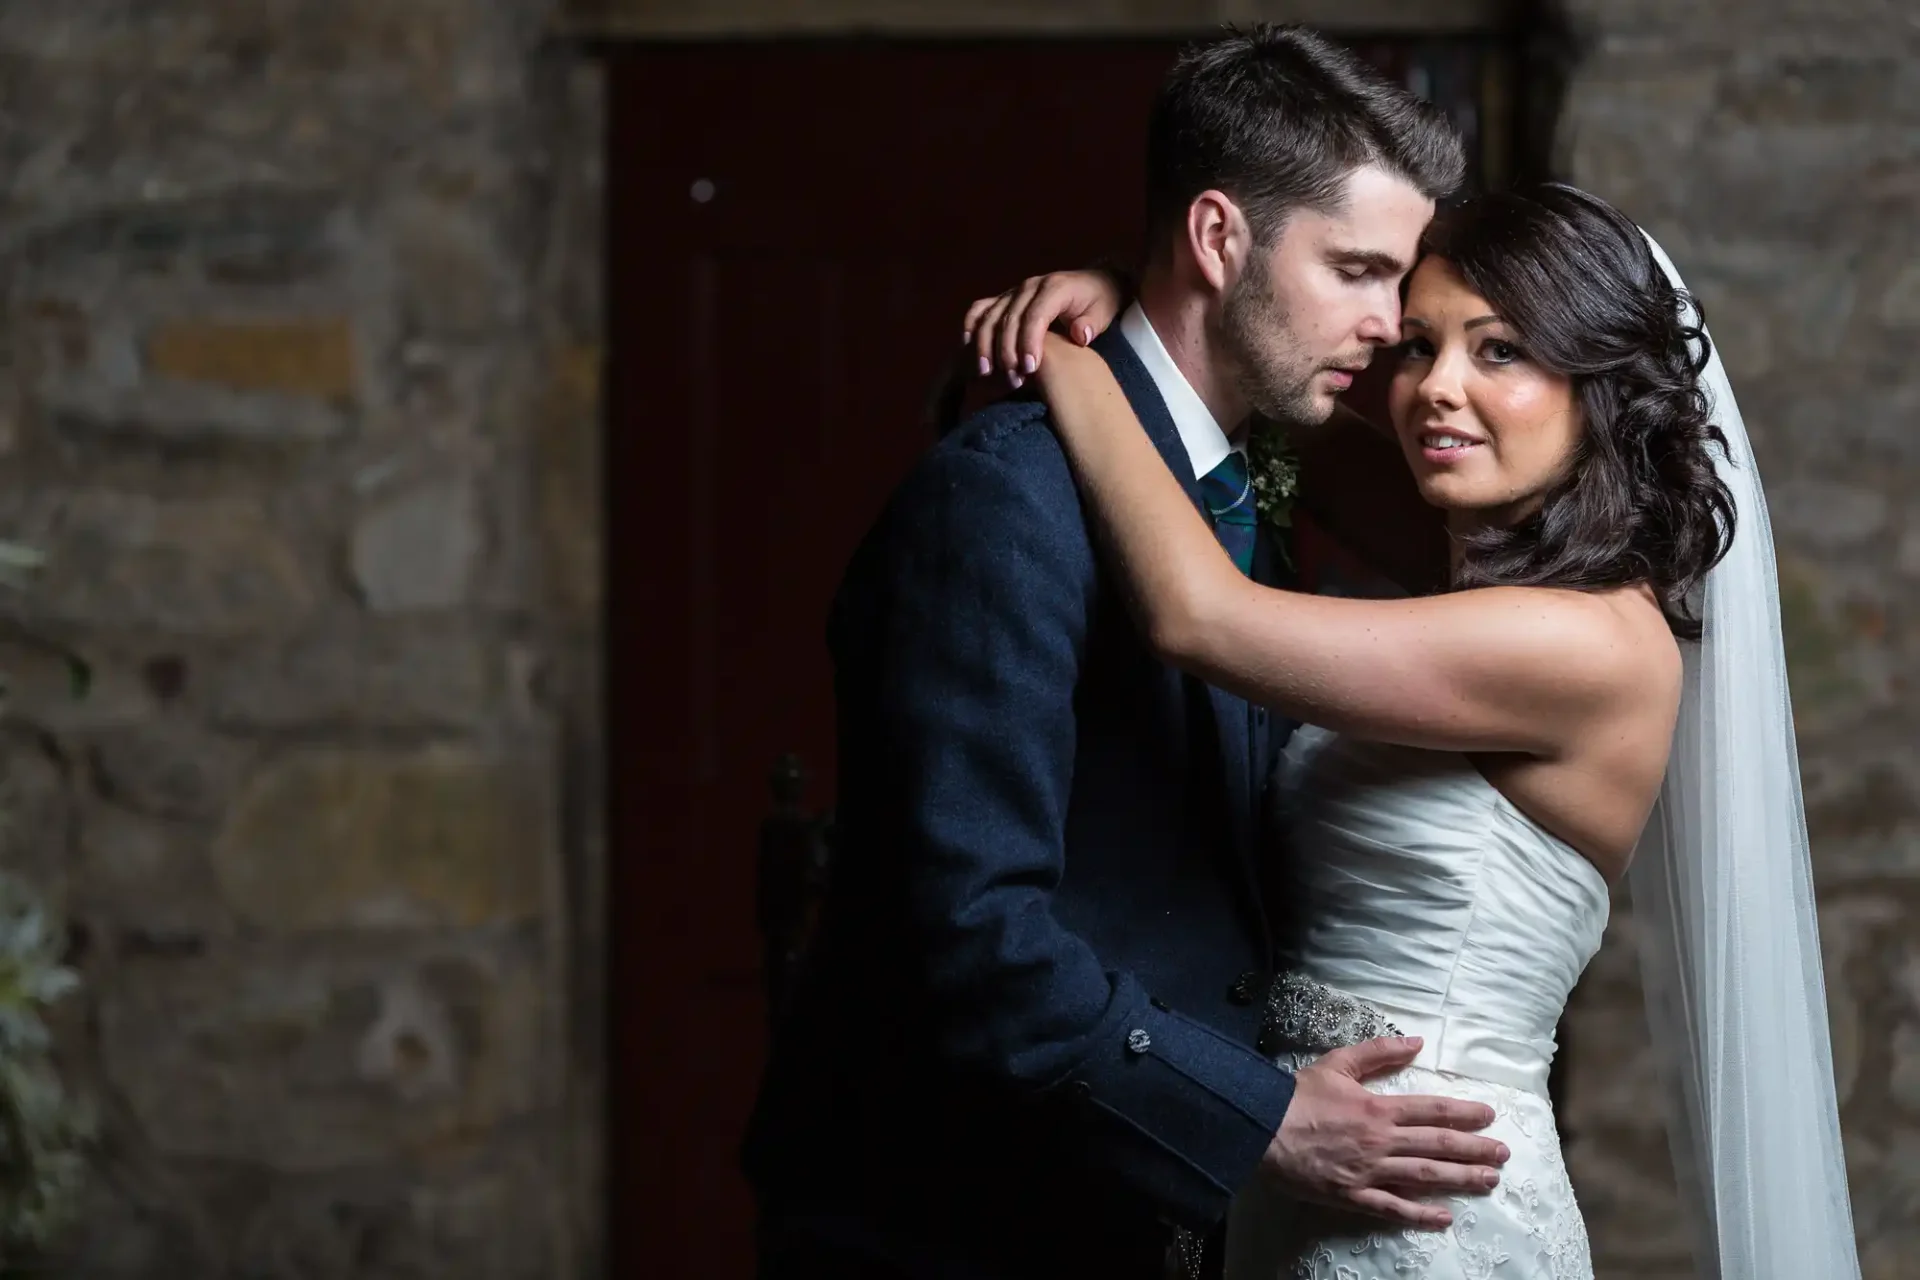 A bride and groom embrace lovingly, illuminated by soft light against a dark stone wall backdrop.